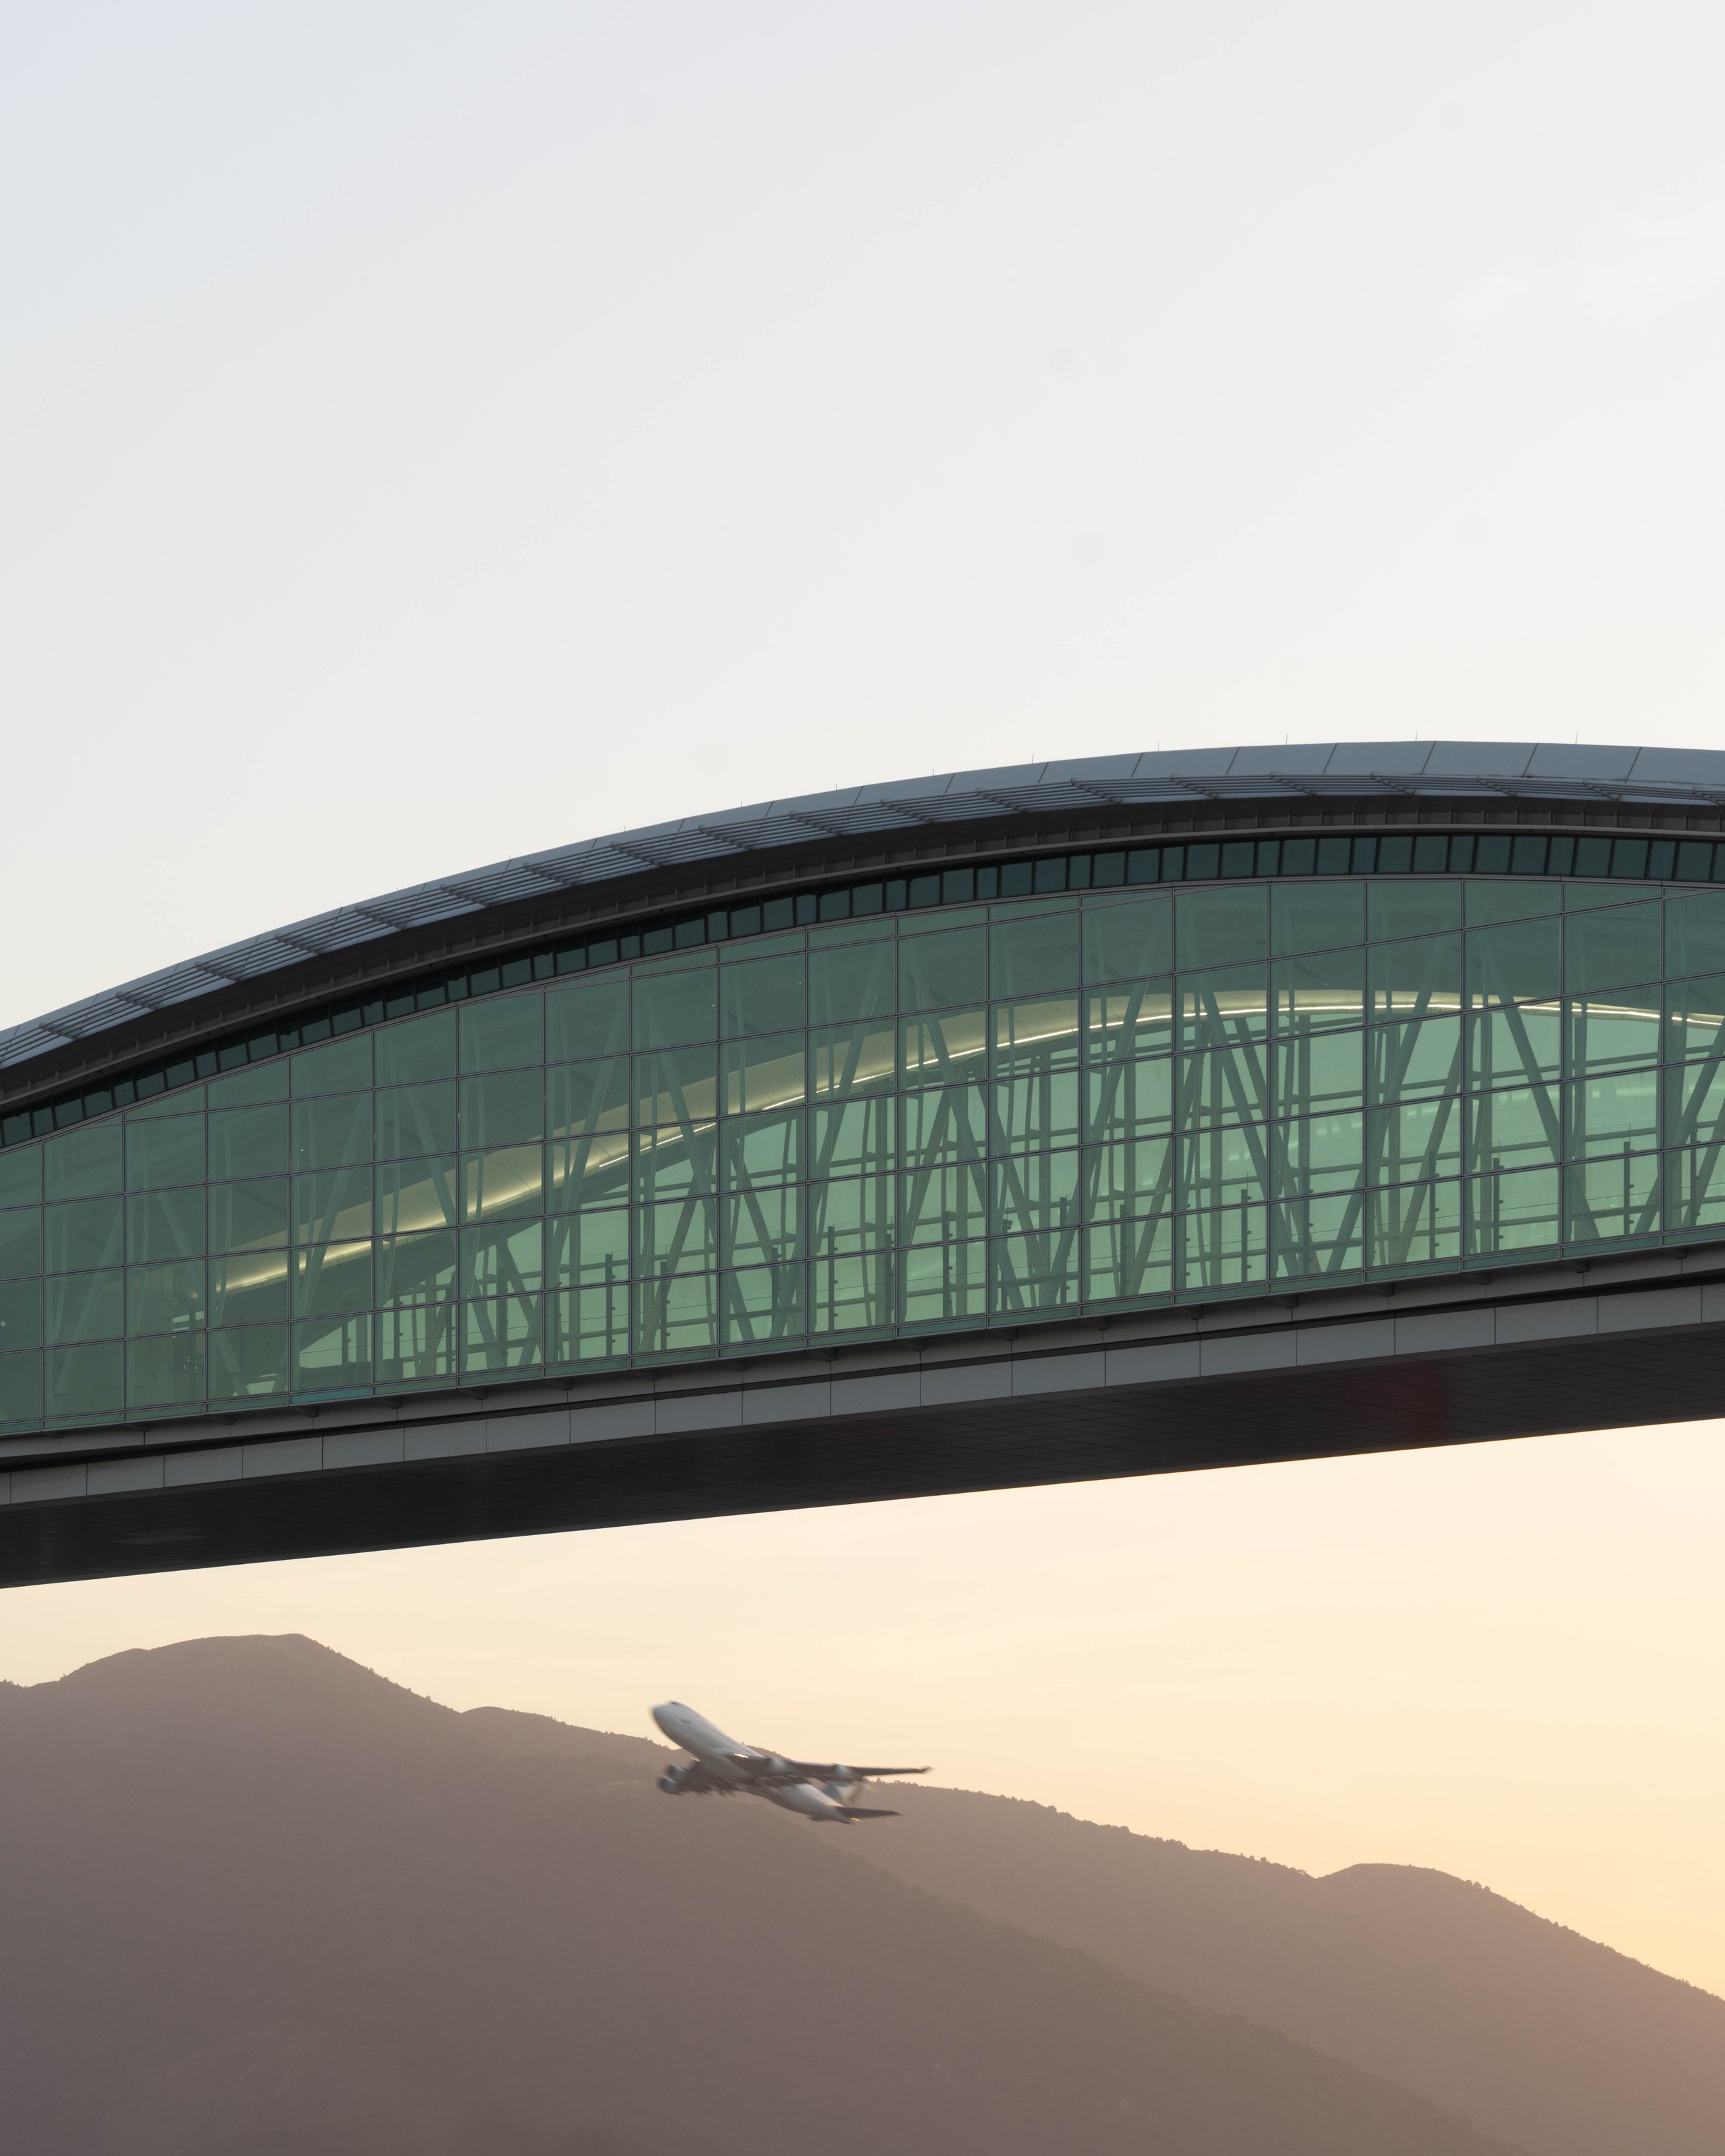  Sky Bridge   Hong Kong International Airport HKIA  Design by / Photographed for Wilkinson Eyre 